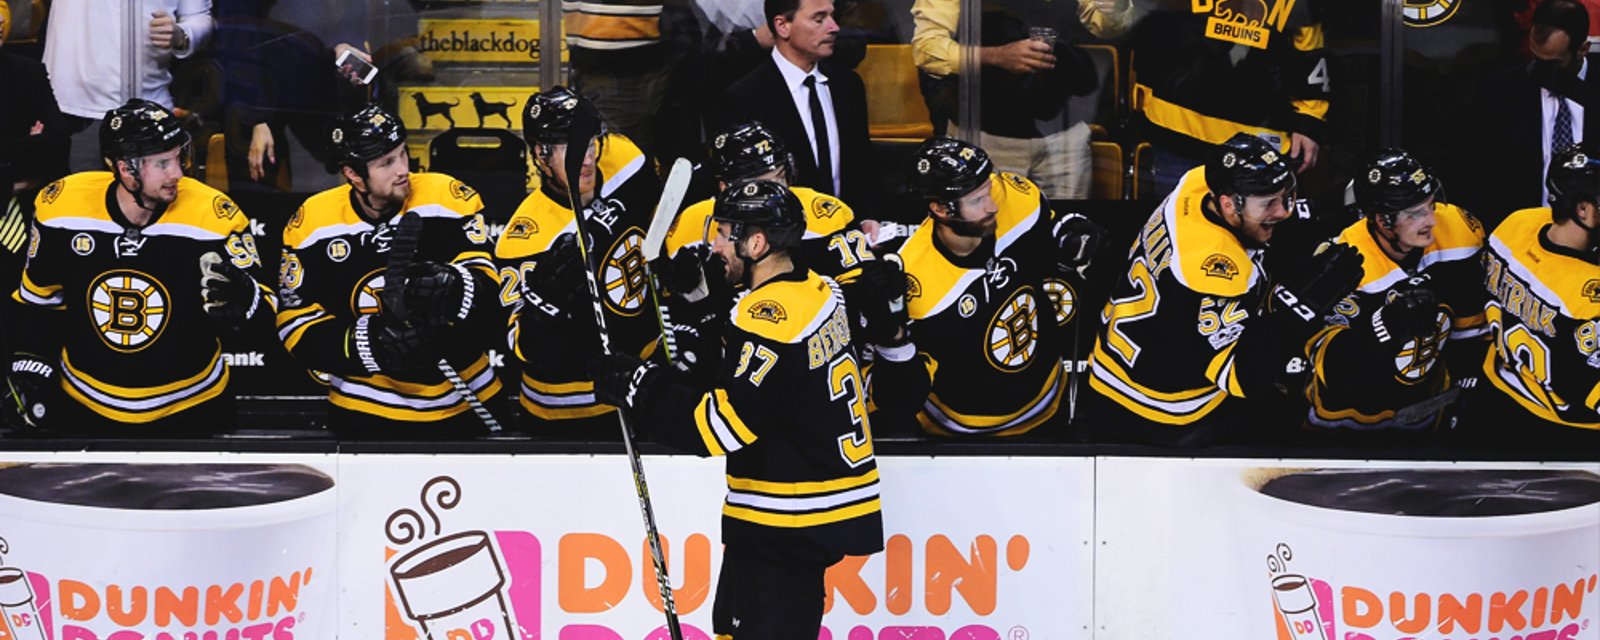 Breaking: Bruins Forward has been told he will not be qualified.